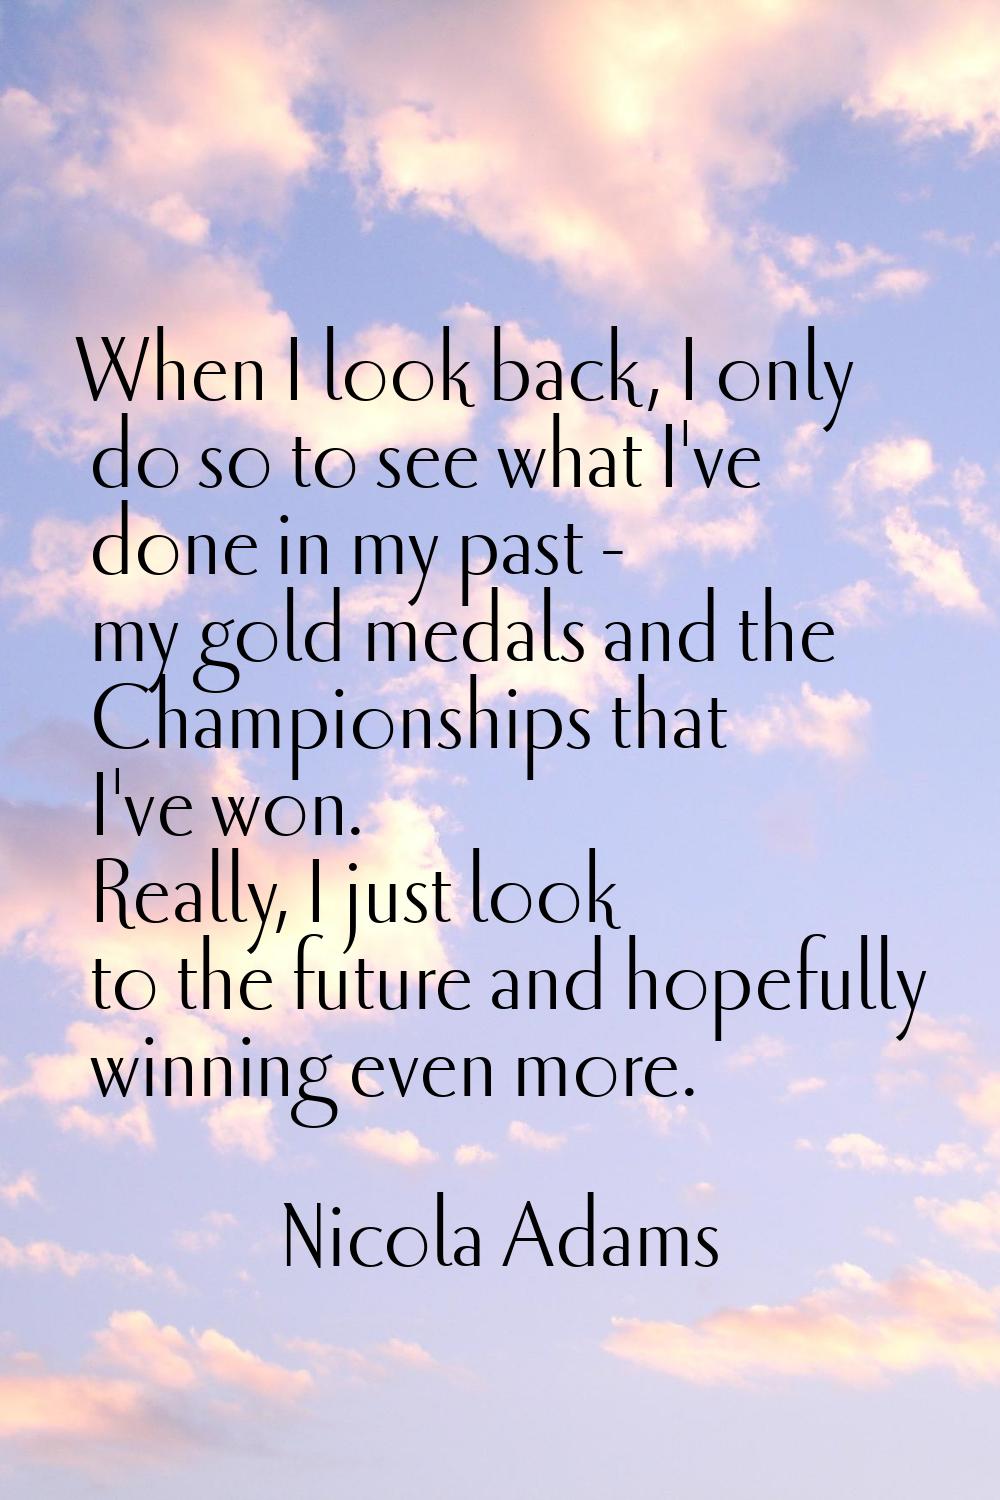 When I look back, I only do so to see what I've done in my past - my gold medals and the Championsh